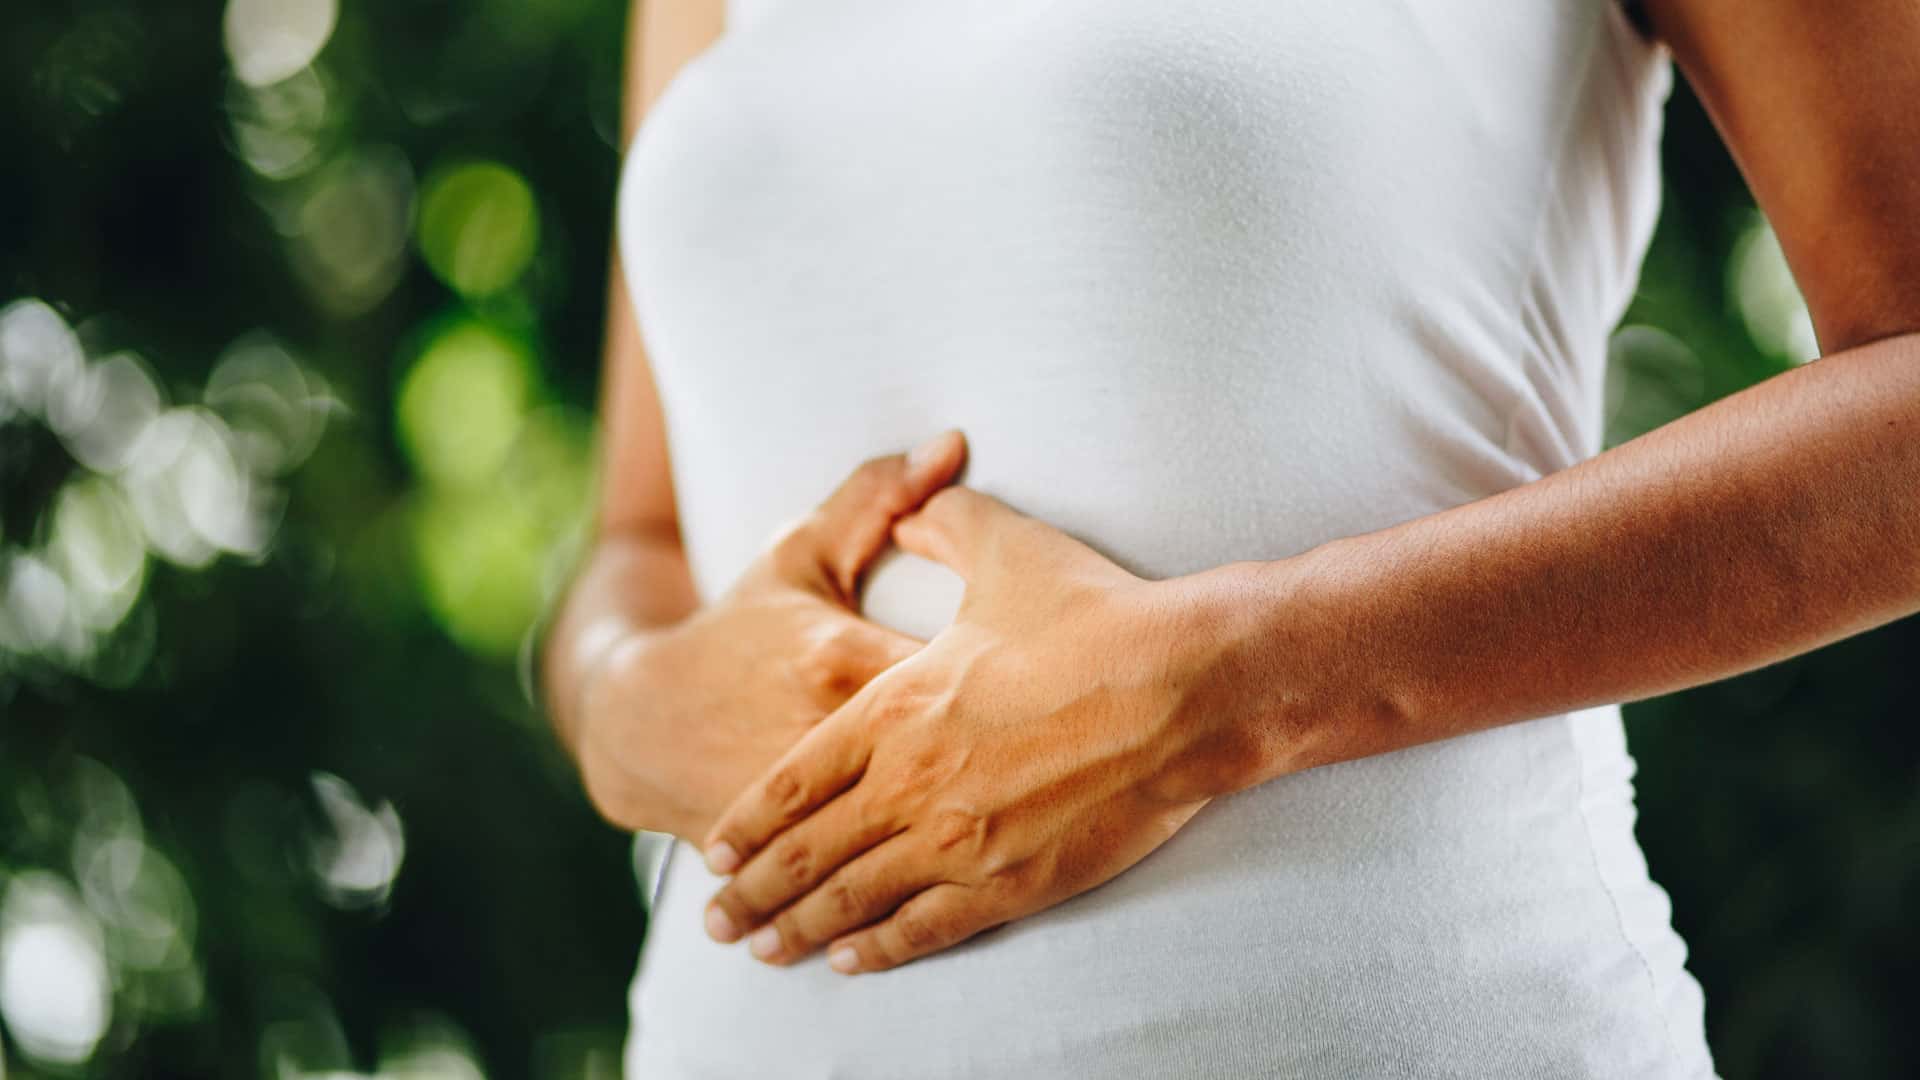 Abdominal Bloating: Causes and Remedies